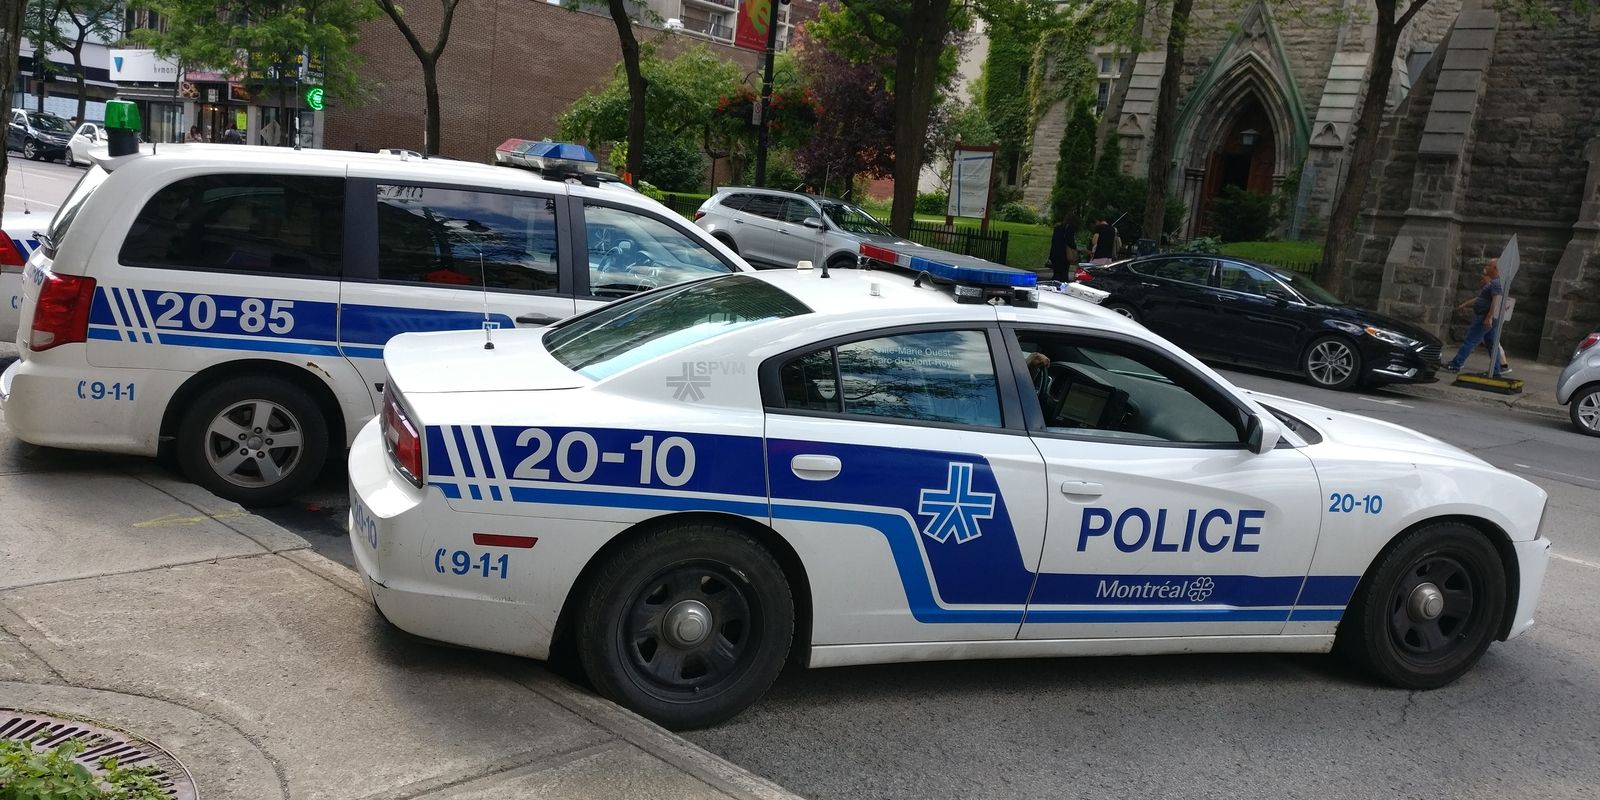 Teen in serious condition following brutal stabbing in Montreal